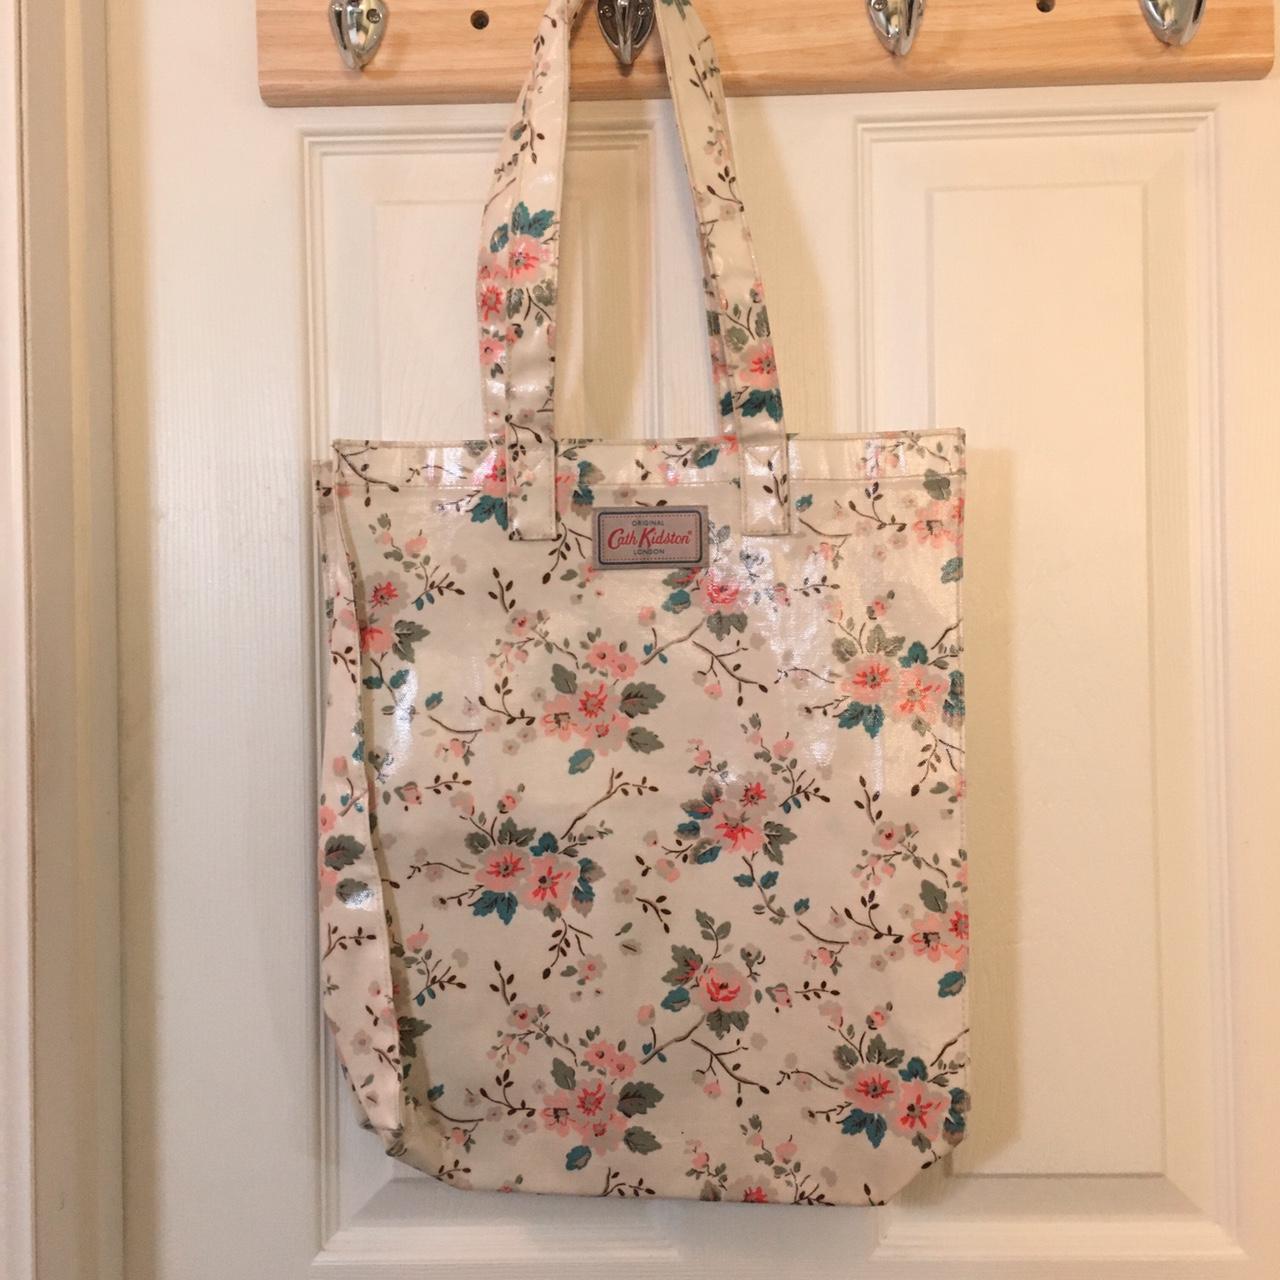 Cath Kidston Women's White and Pink Bag